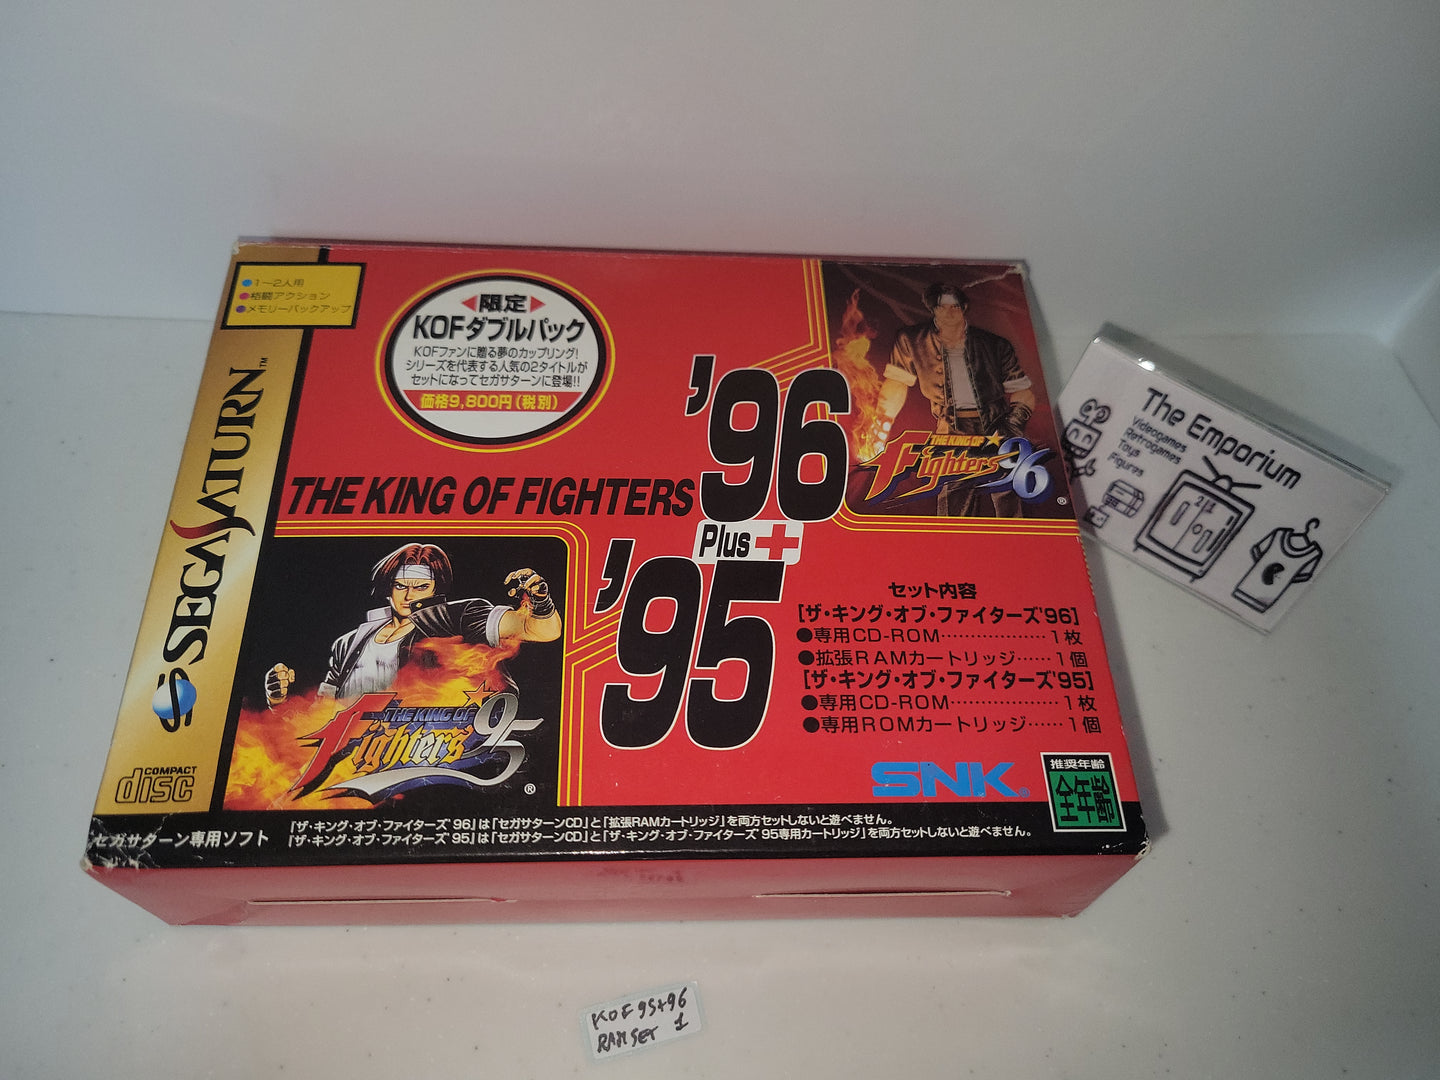 KOF Double Pack: The King of Fighters '95 & '96 [Limited Edition w/ 1MB RAM Cart] - Sega Saturn SegaSaturn